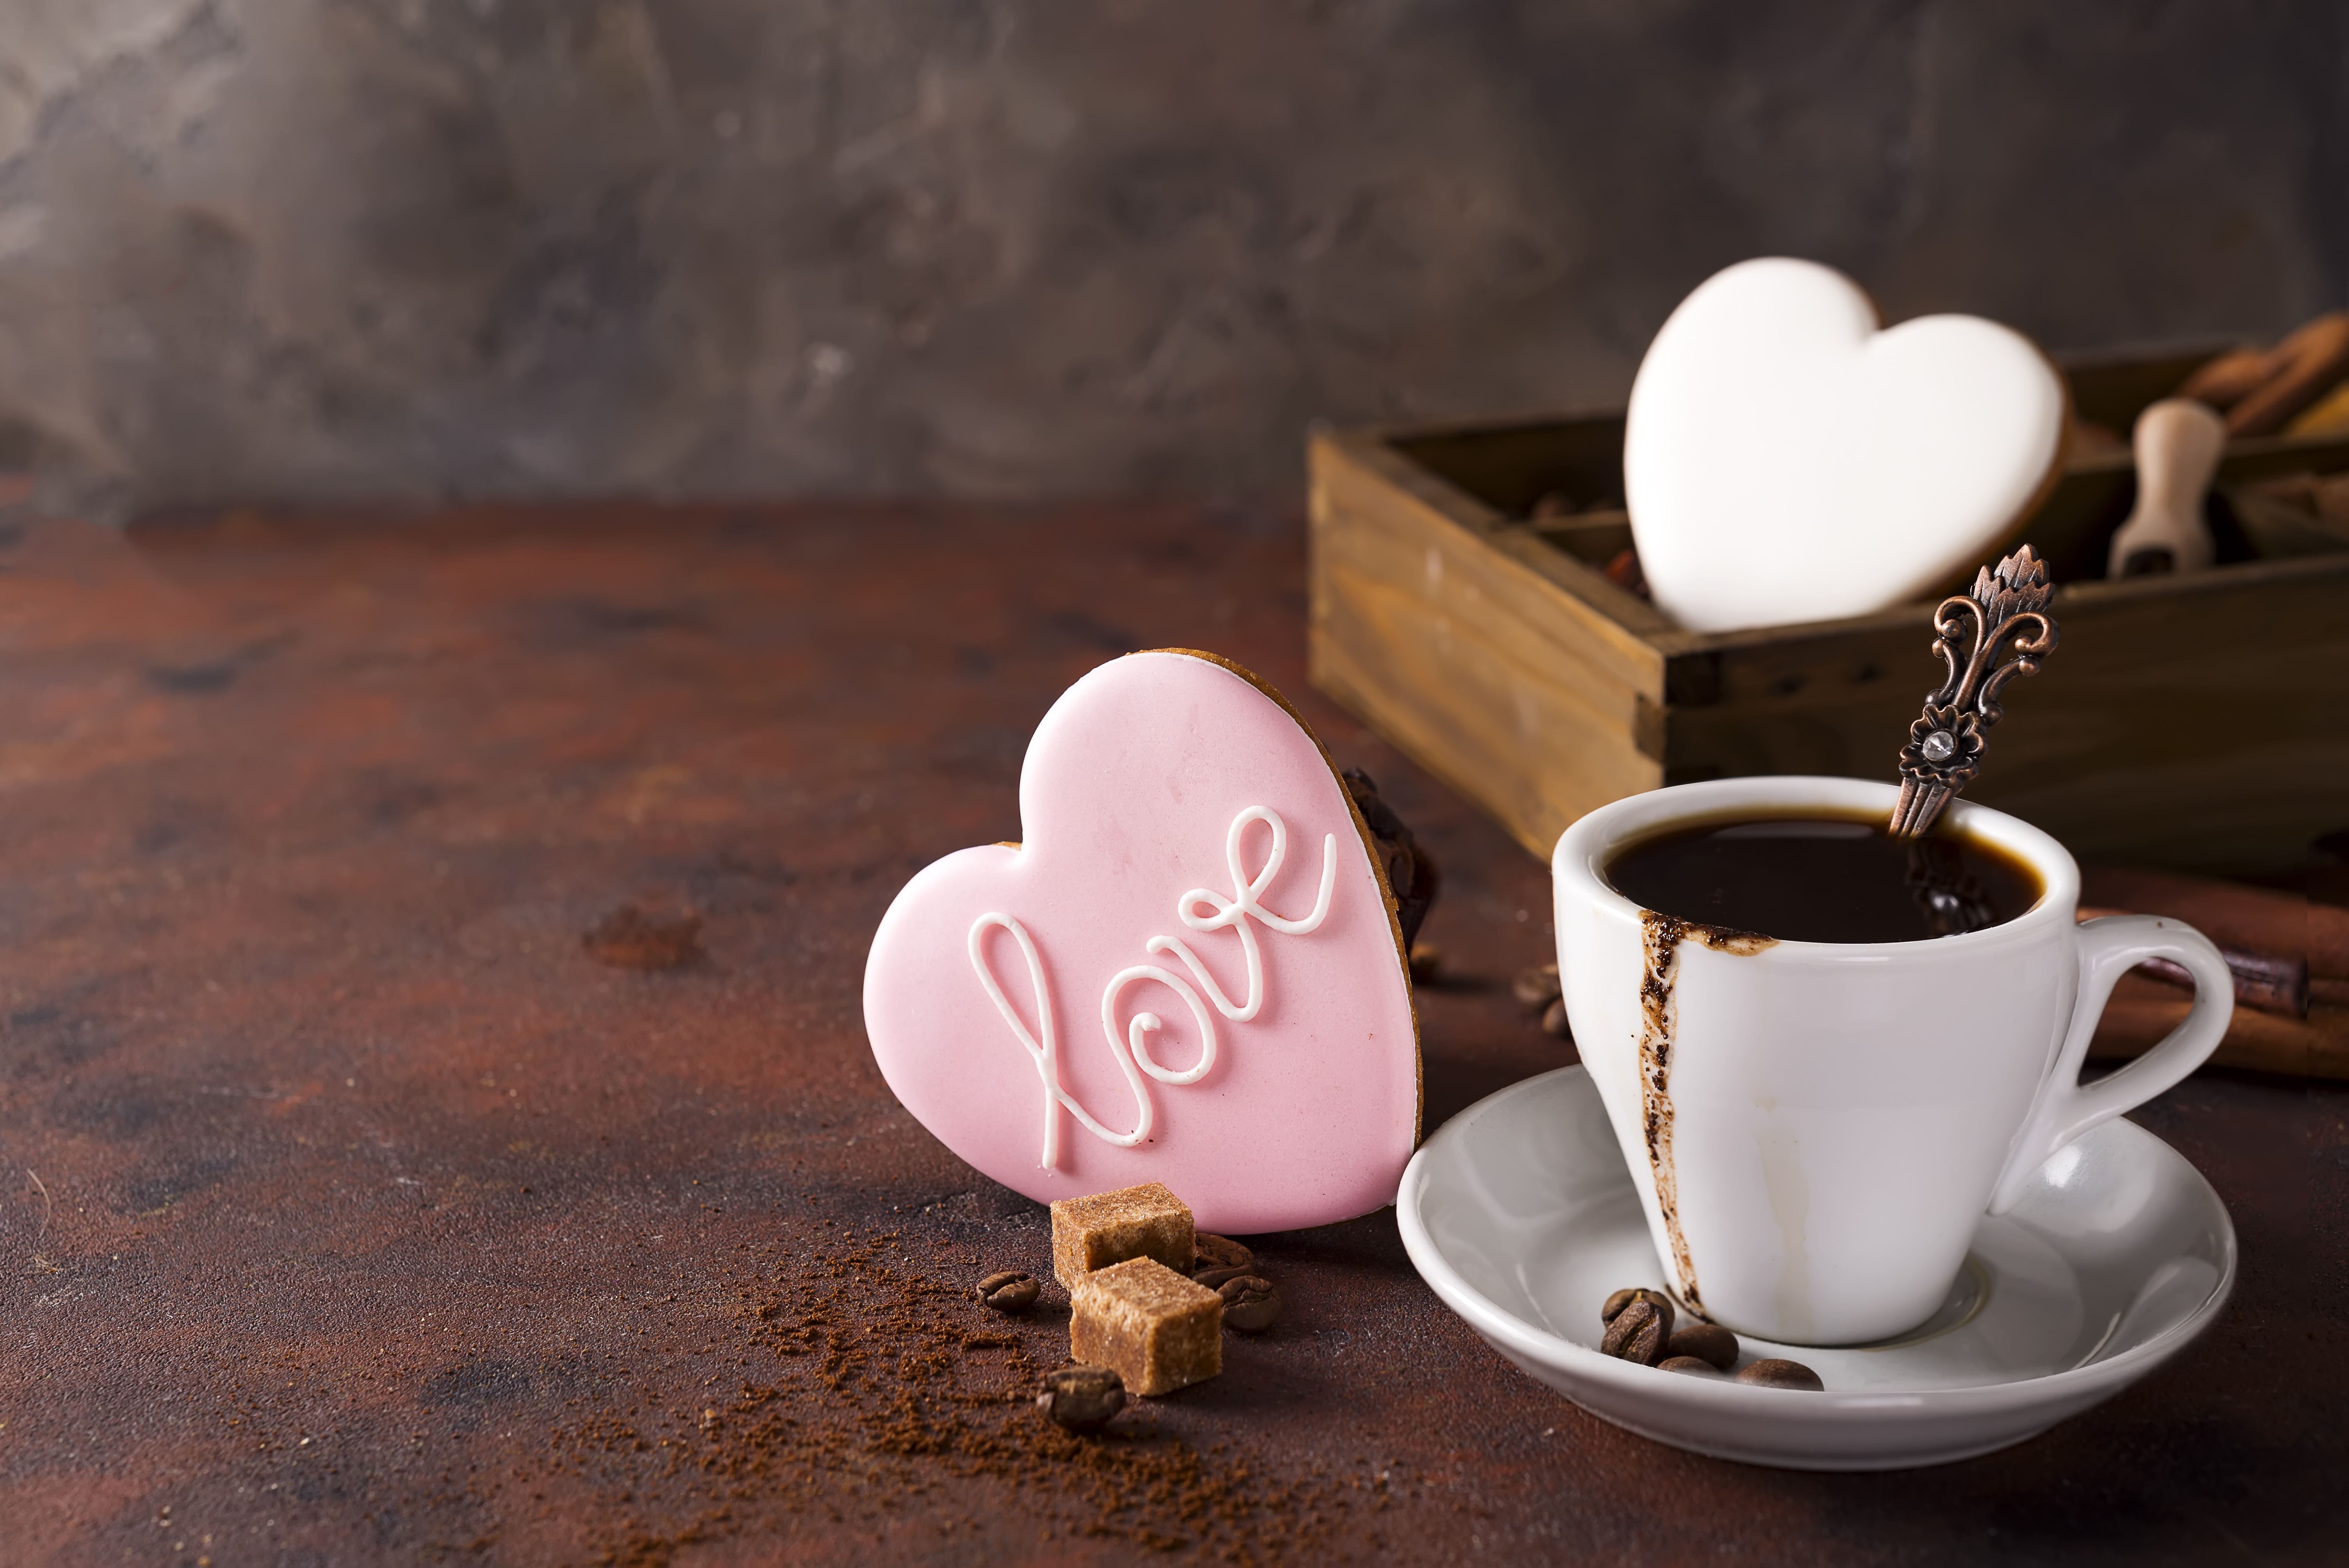 Coffee Cookie Cup Drink Heart Shaped Still Life 6016x4016